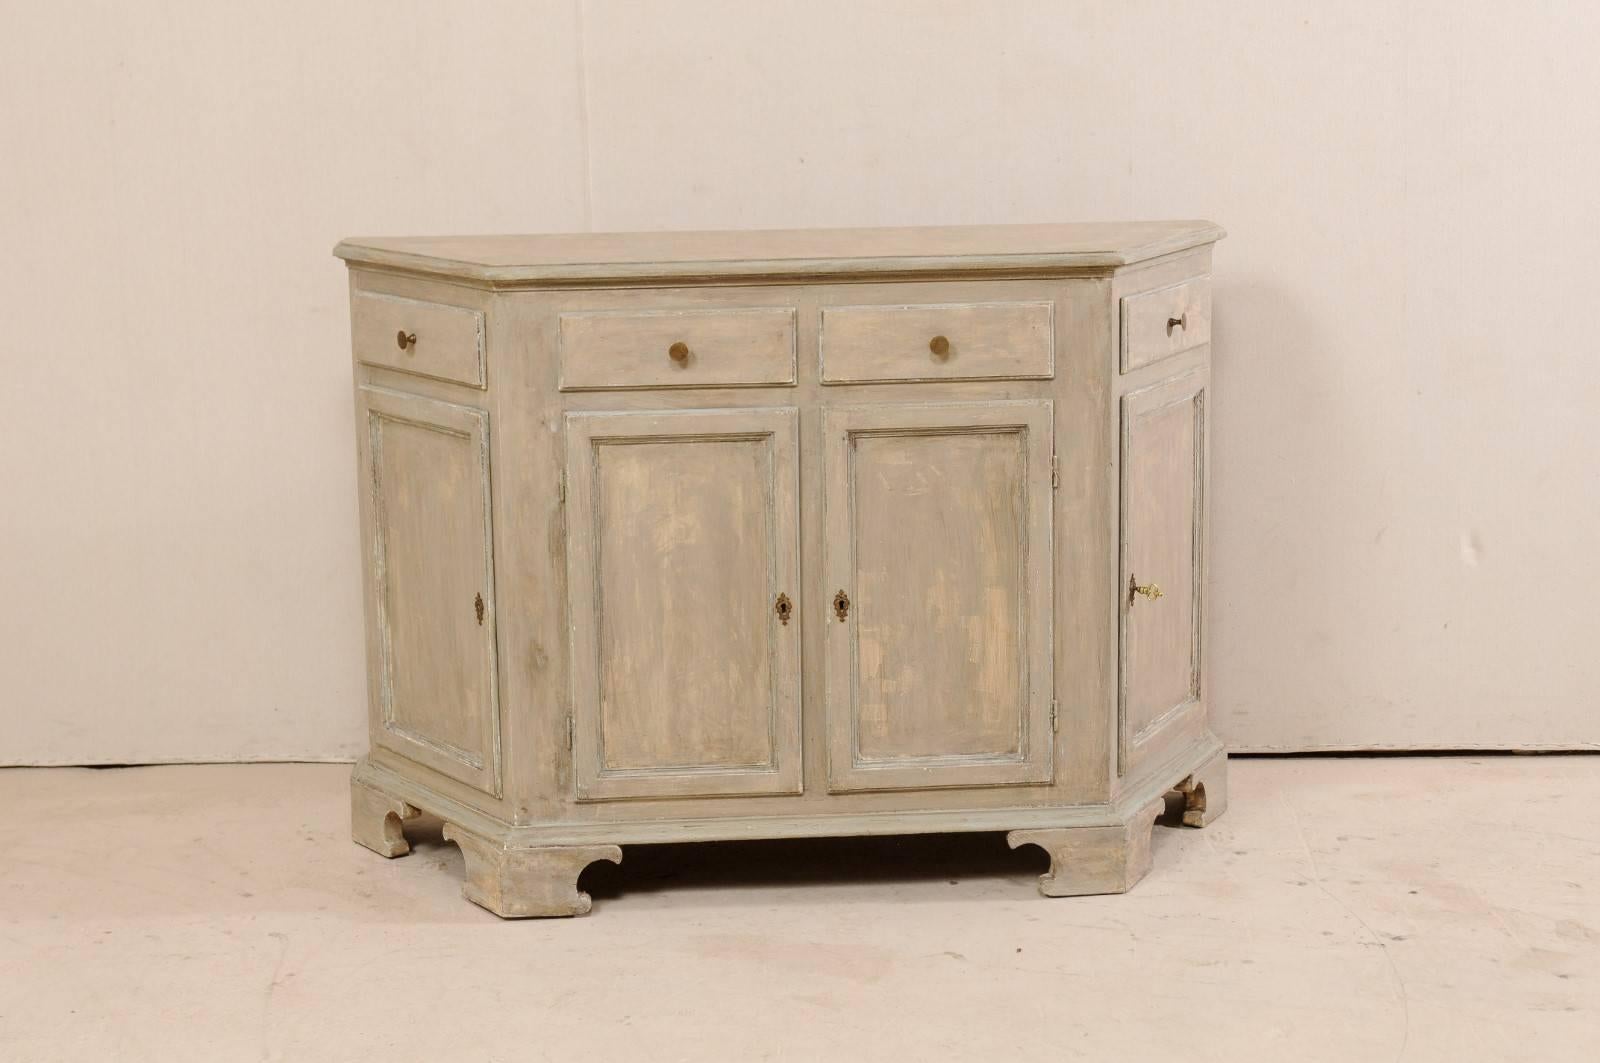 An Italian midcentury painted wood console cabinet. This vintage Italian buffet cabinet features clean lines and trim with nicely canted sides. There are four drawers over four doors, two each paired at the centre, with a single drawer over a single